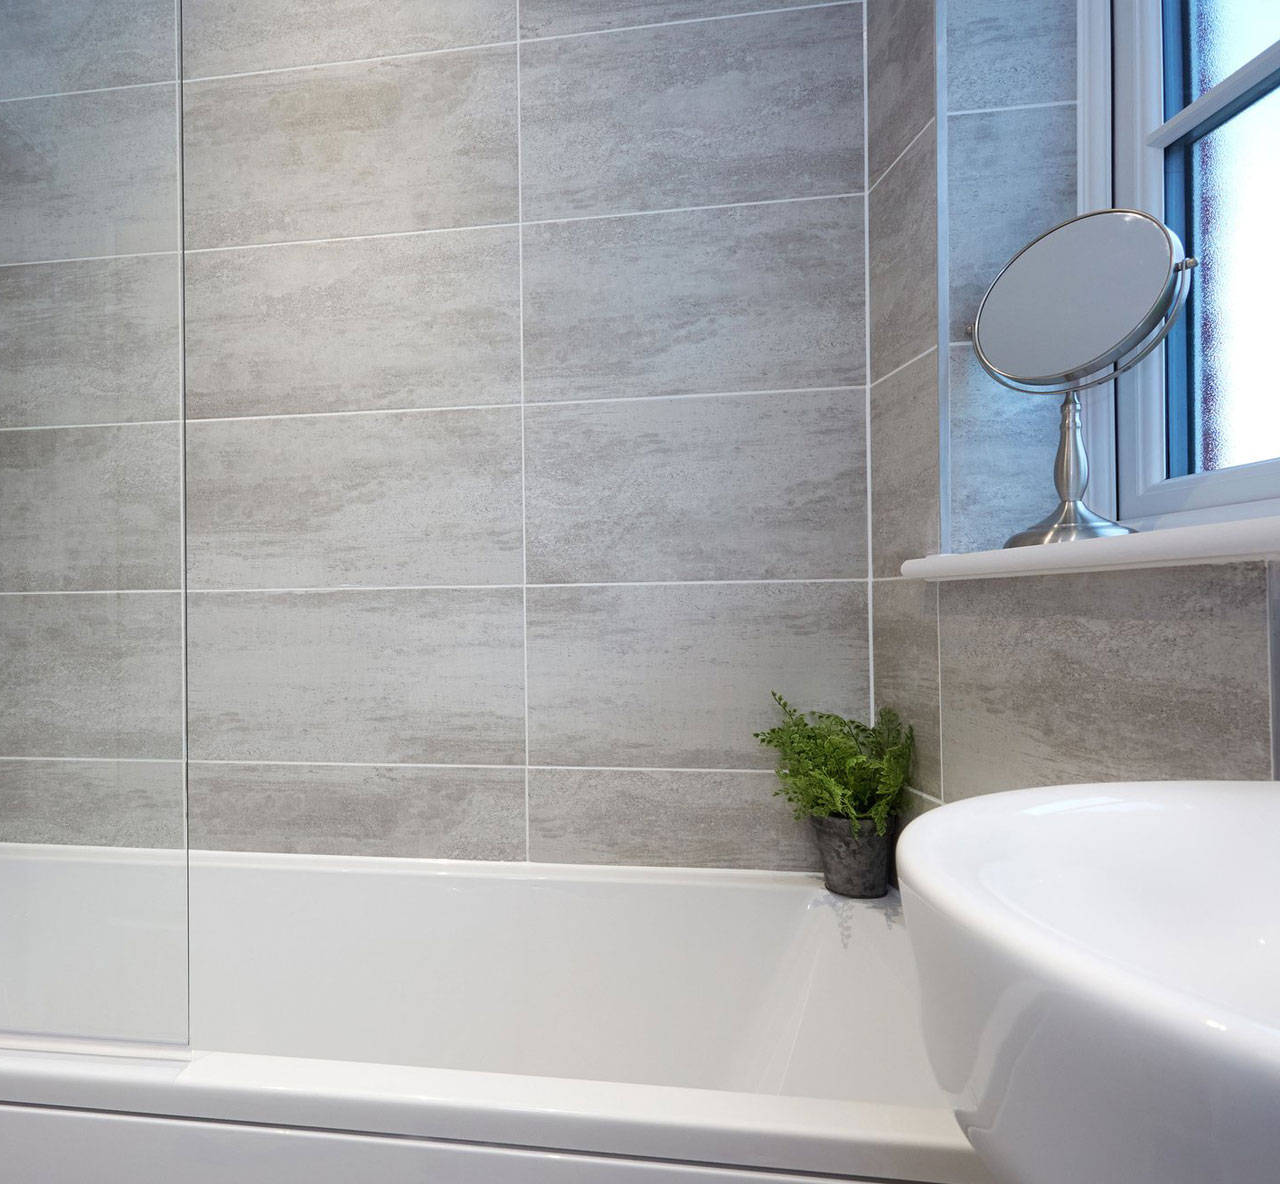 Johnsons Crafted Grey Stone Effect Wall Tiles used in a stone effect bathroom in a shower area